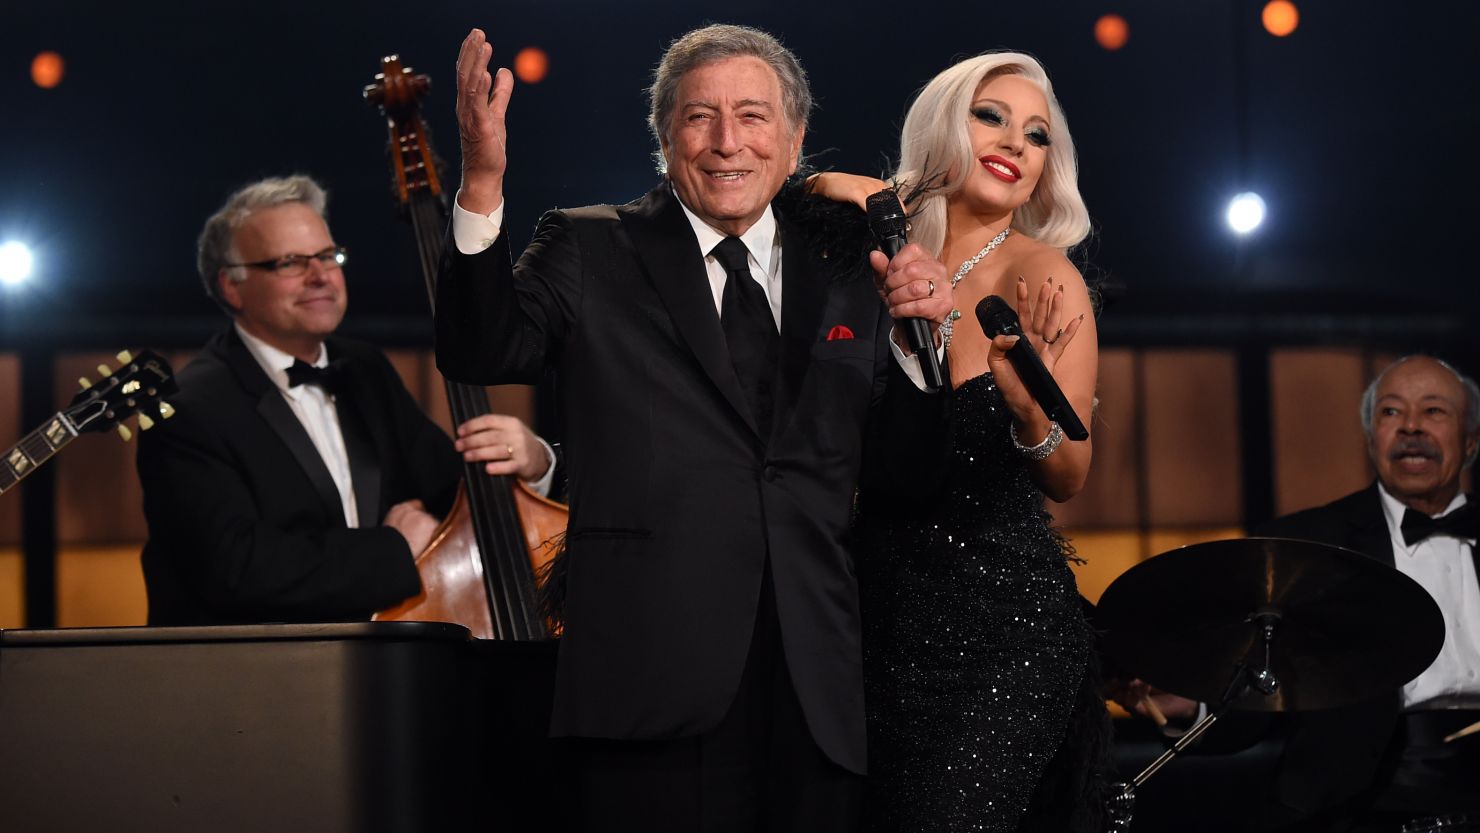 Tony Bennett and Lady Gaga, pictured here at the 2015 Grammy Awards, will team up again for two performances next month.